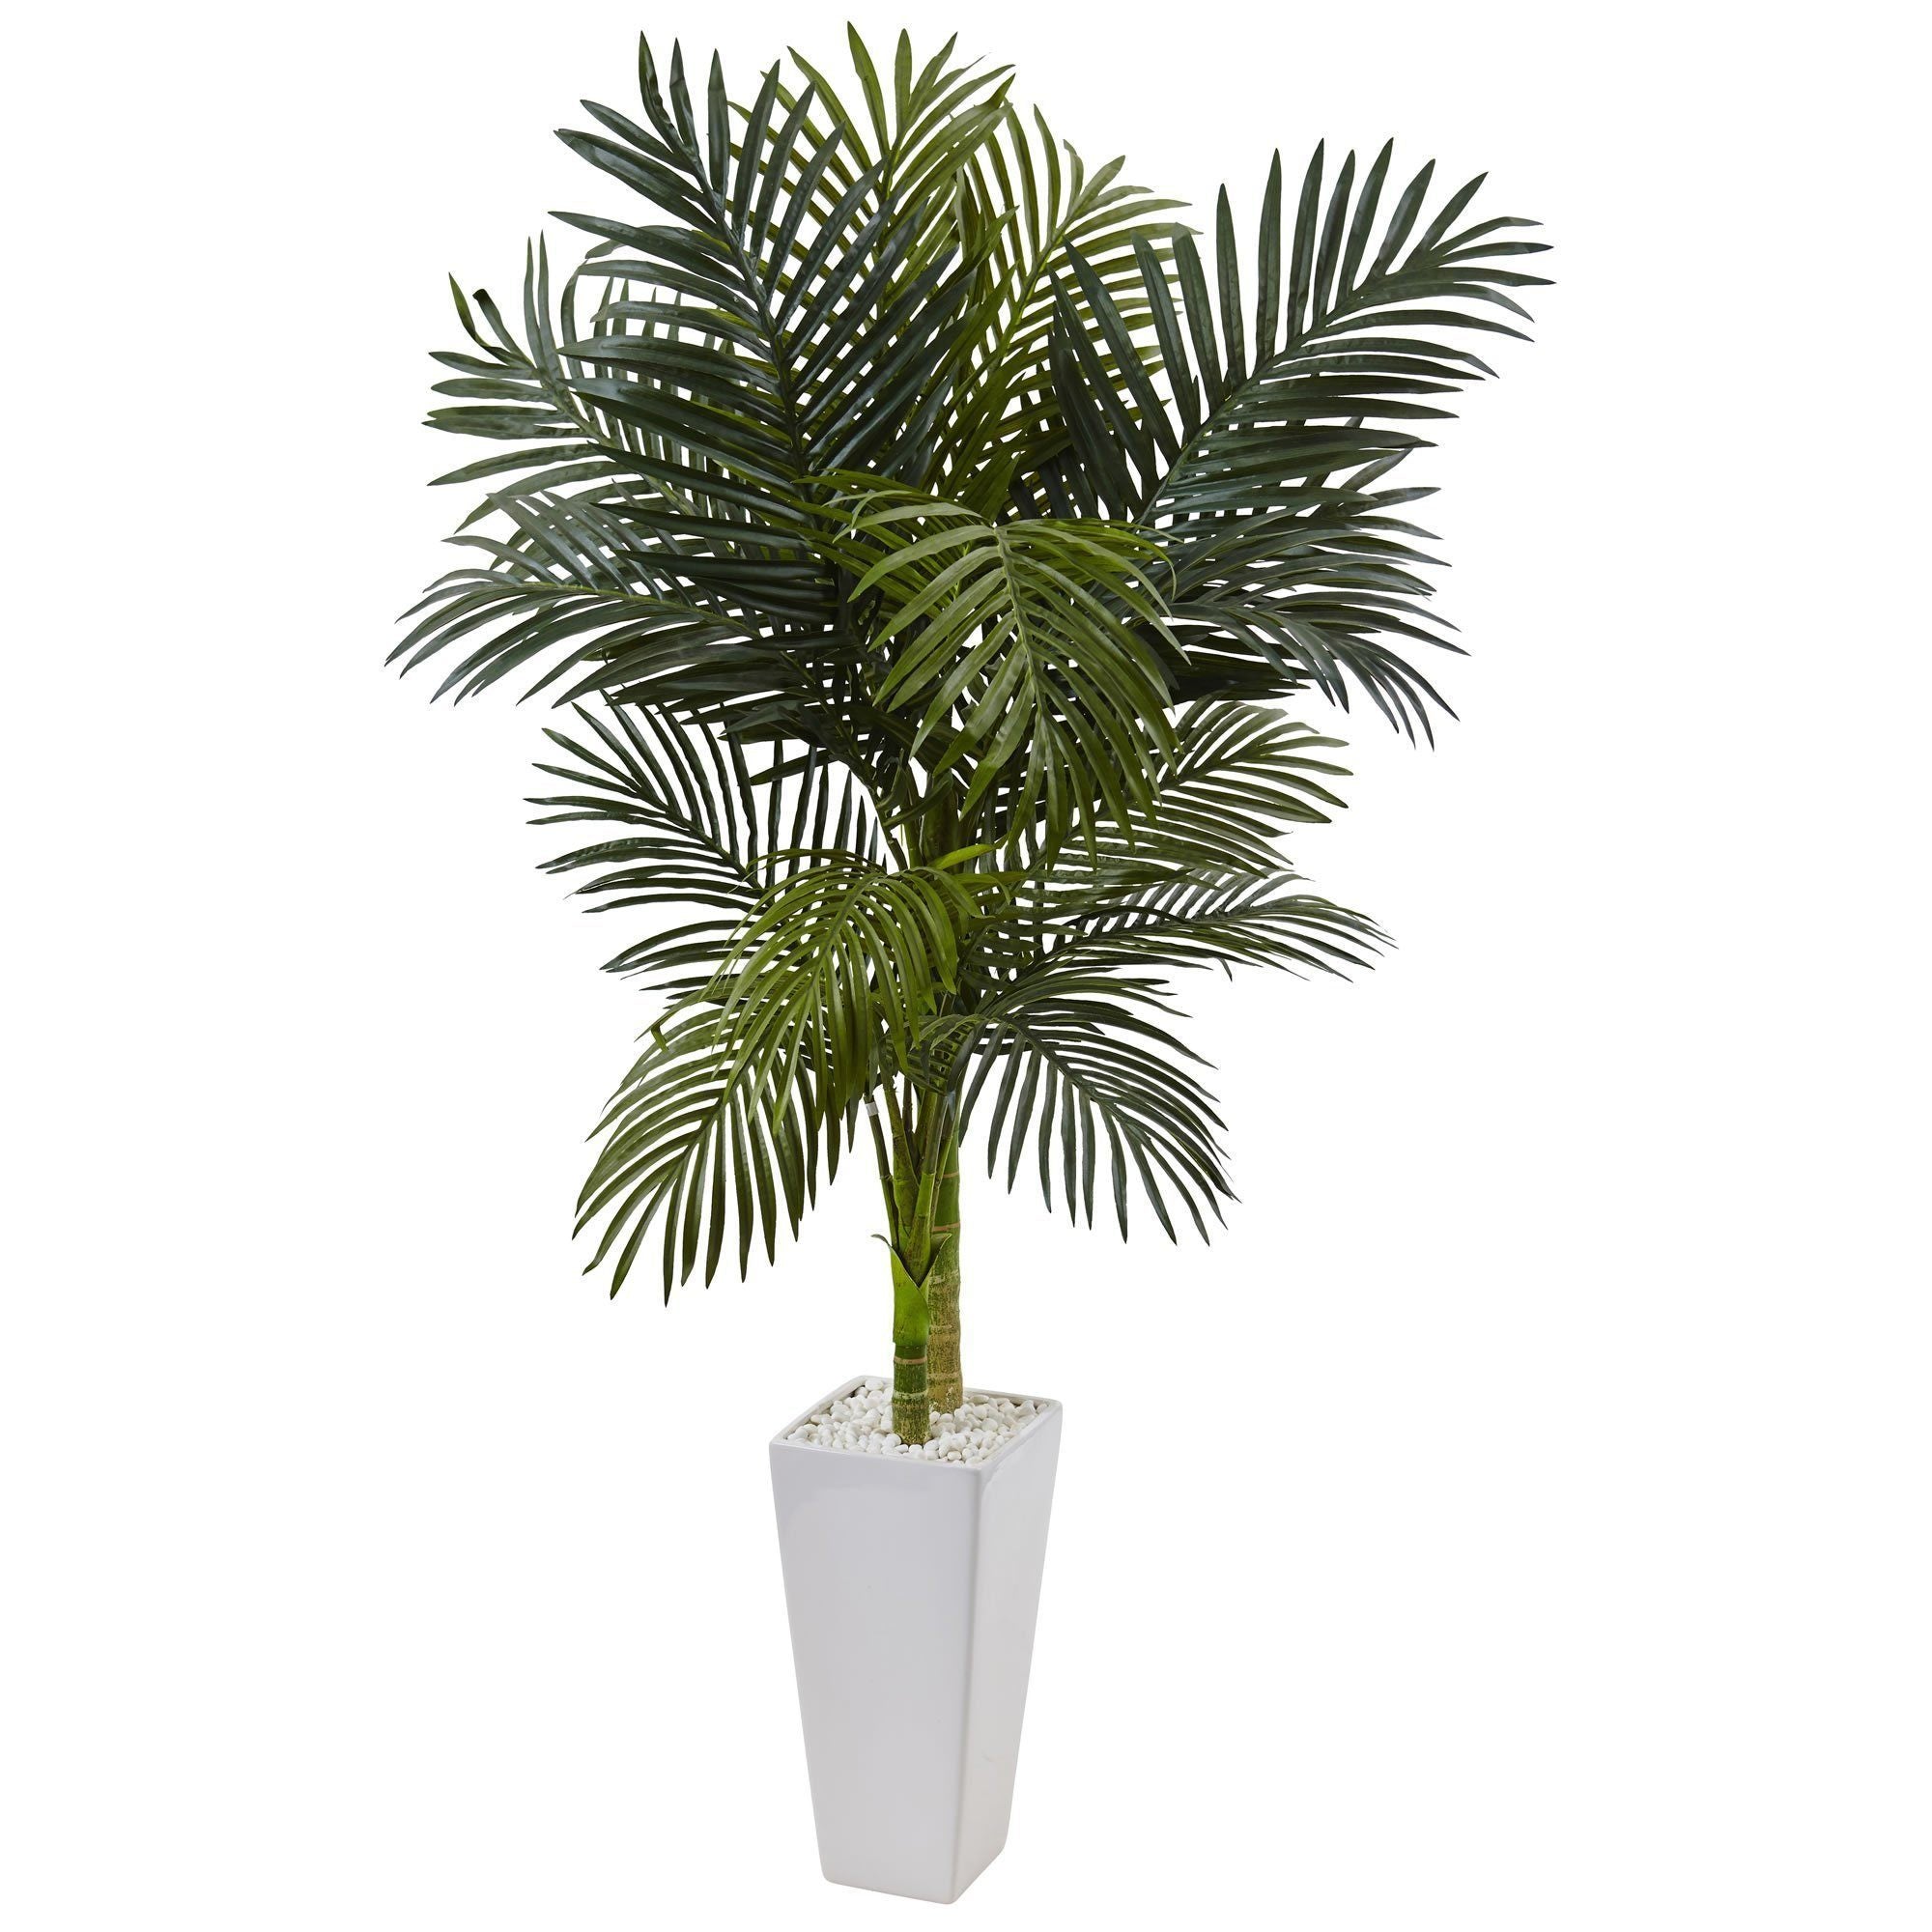 5’ Golden Cane Palm Tree in White Tower Planter | Nearly Natural